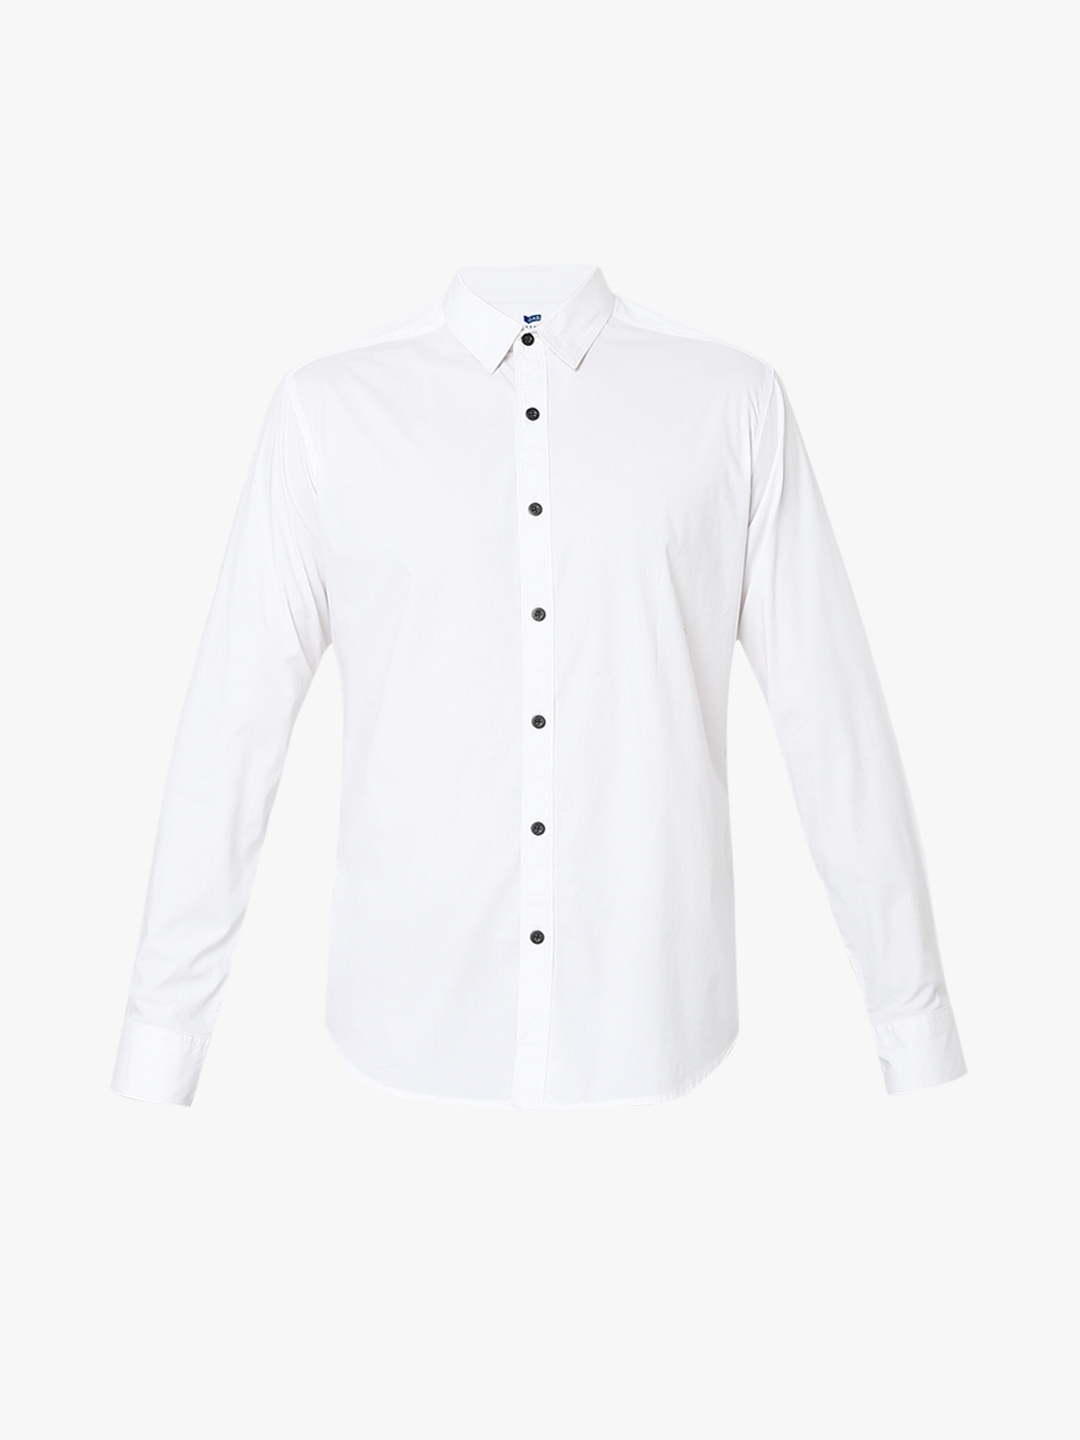 Andrew Mix Relaxed Fit Shirt